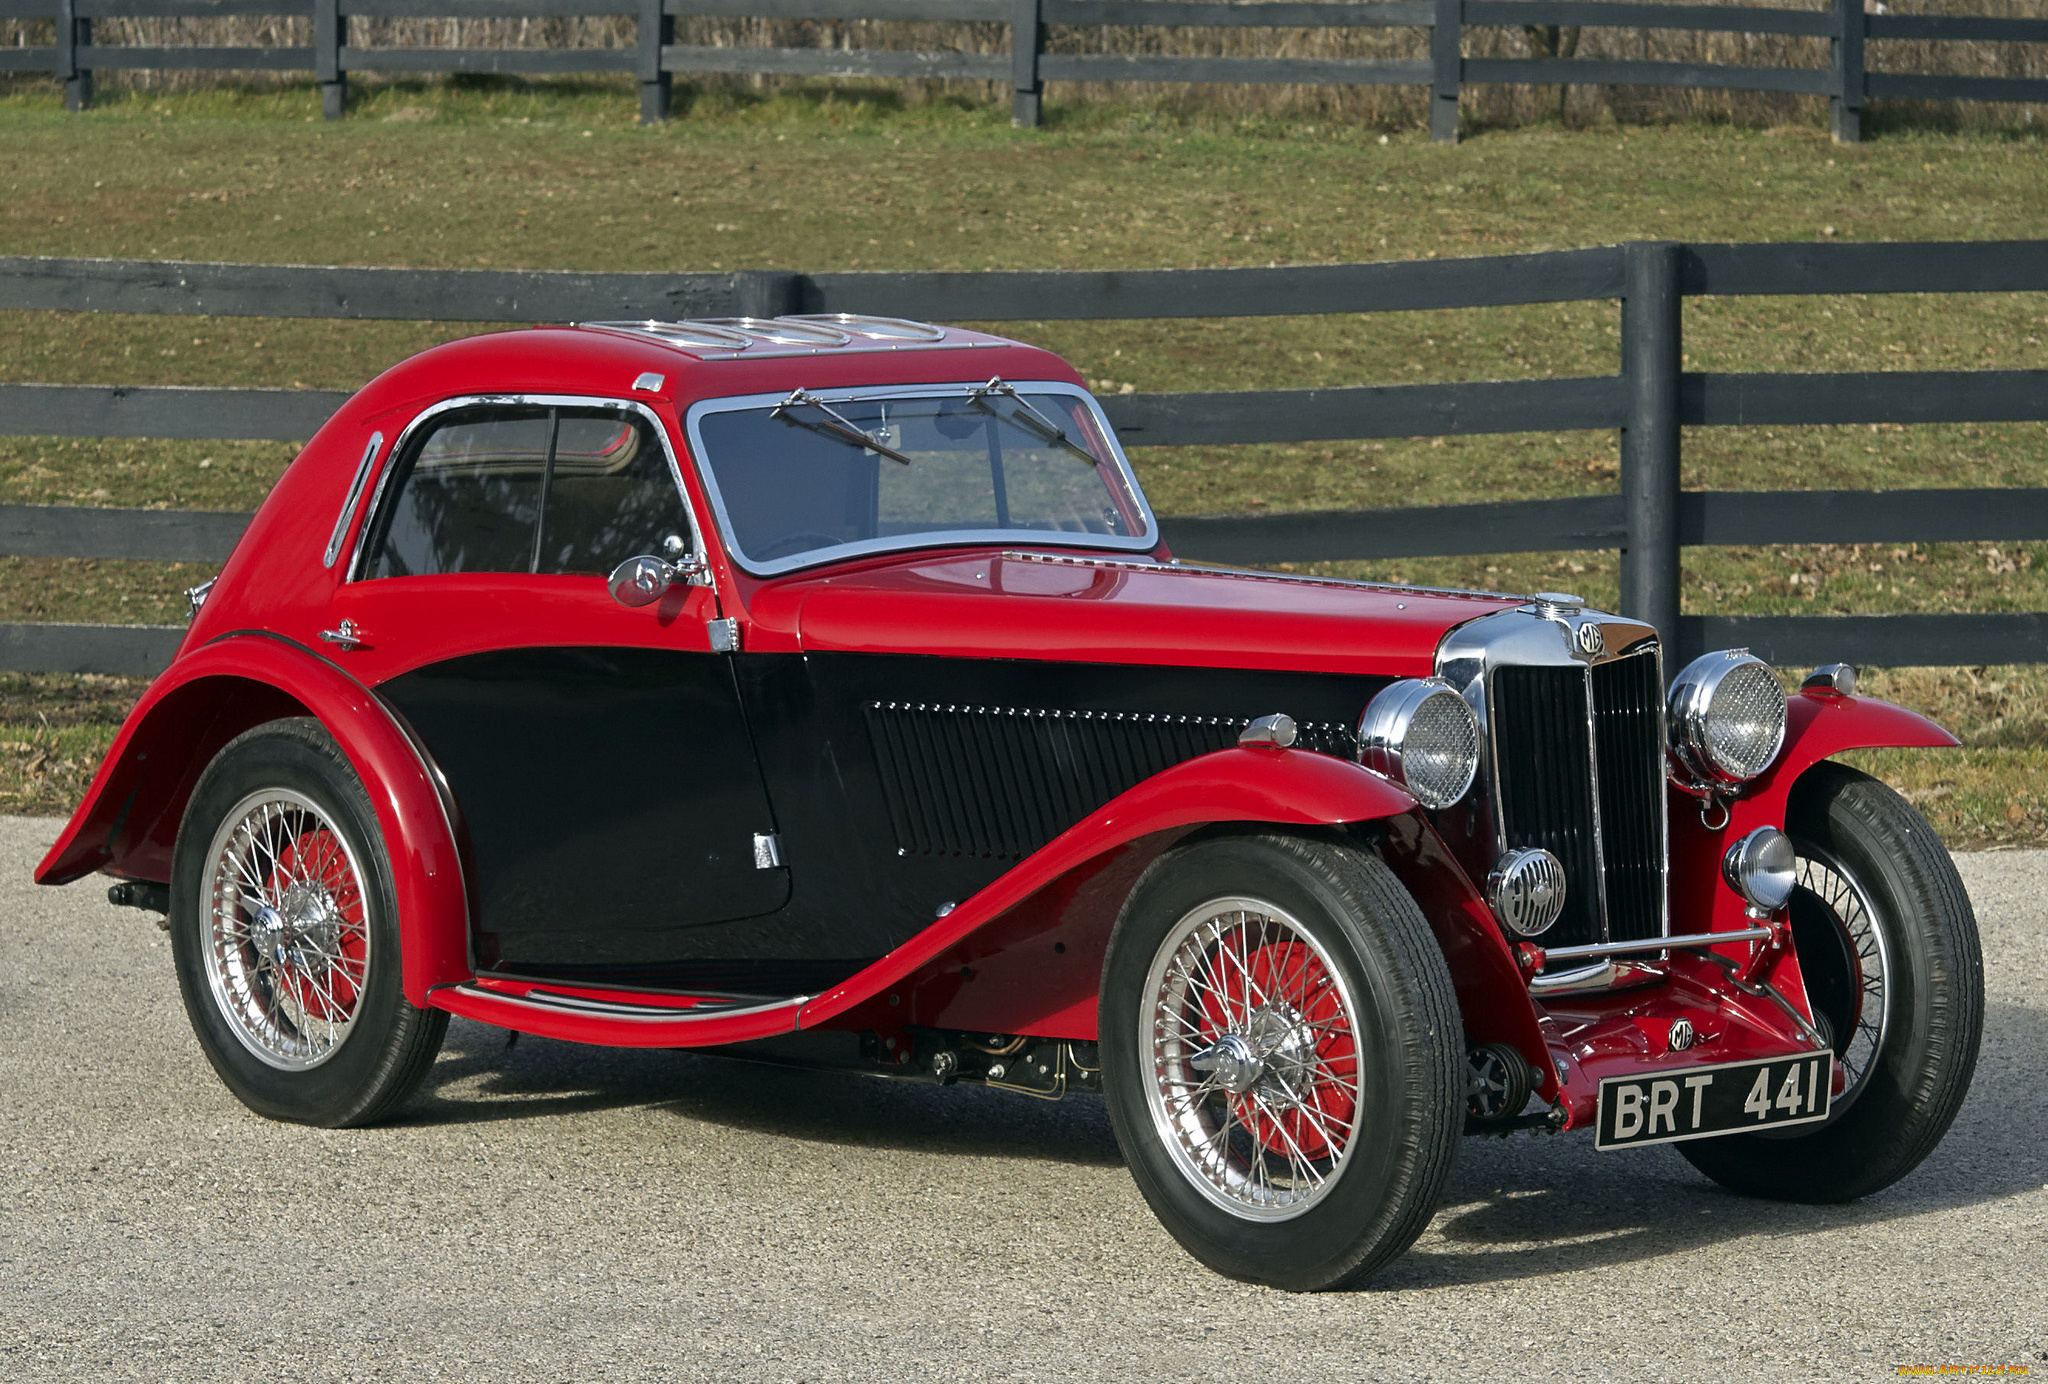 mg, nb, magnette, airline, coupe, by, allingham, 1935, автомобили, mg, nb, magnette, airline, coupe, allingham, 1935